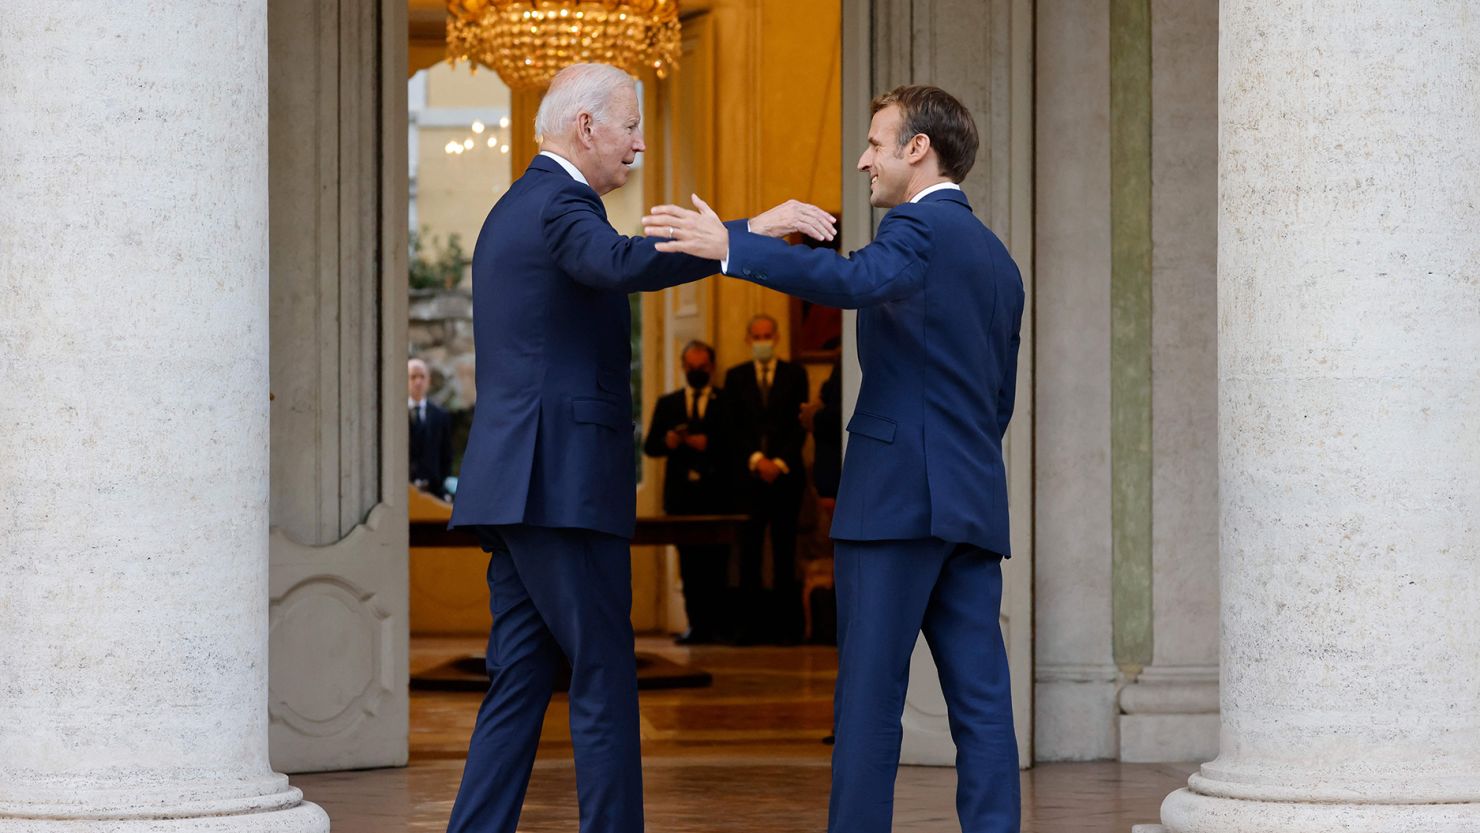 TOPSHOT - French President Emmanuel Macron (R) welcomes US President Joe Biden before their meeting at the French Embassy to the Vatican in Rome on October 29, 2021. (Photo by Ludovic MARIN / AFP) (Photo by LUDOVIC MARIN/AFP via Getty Images)